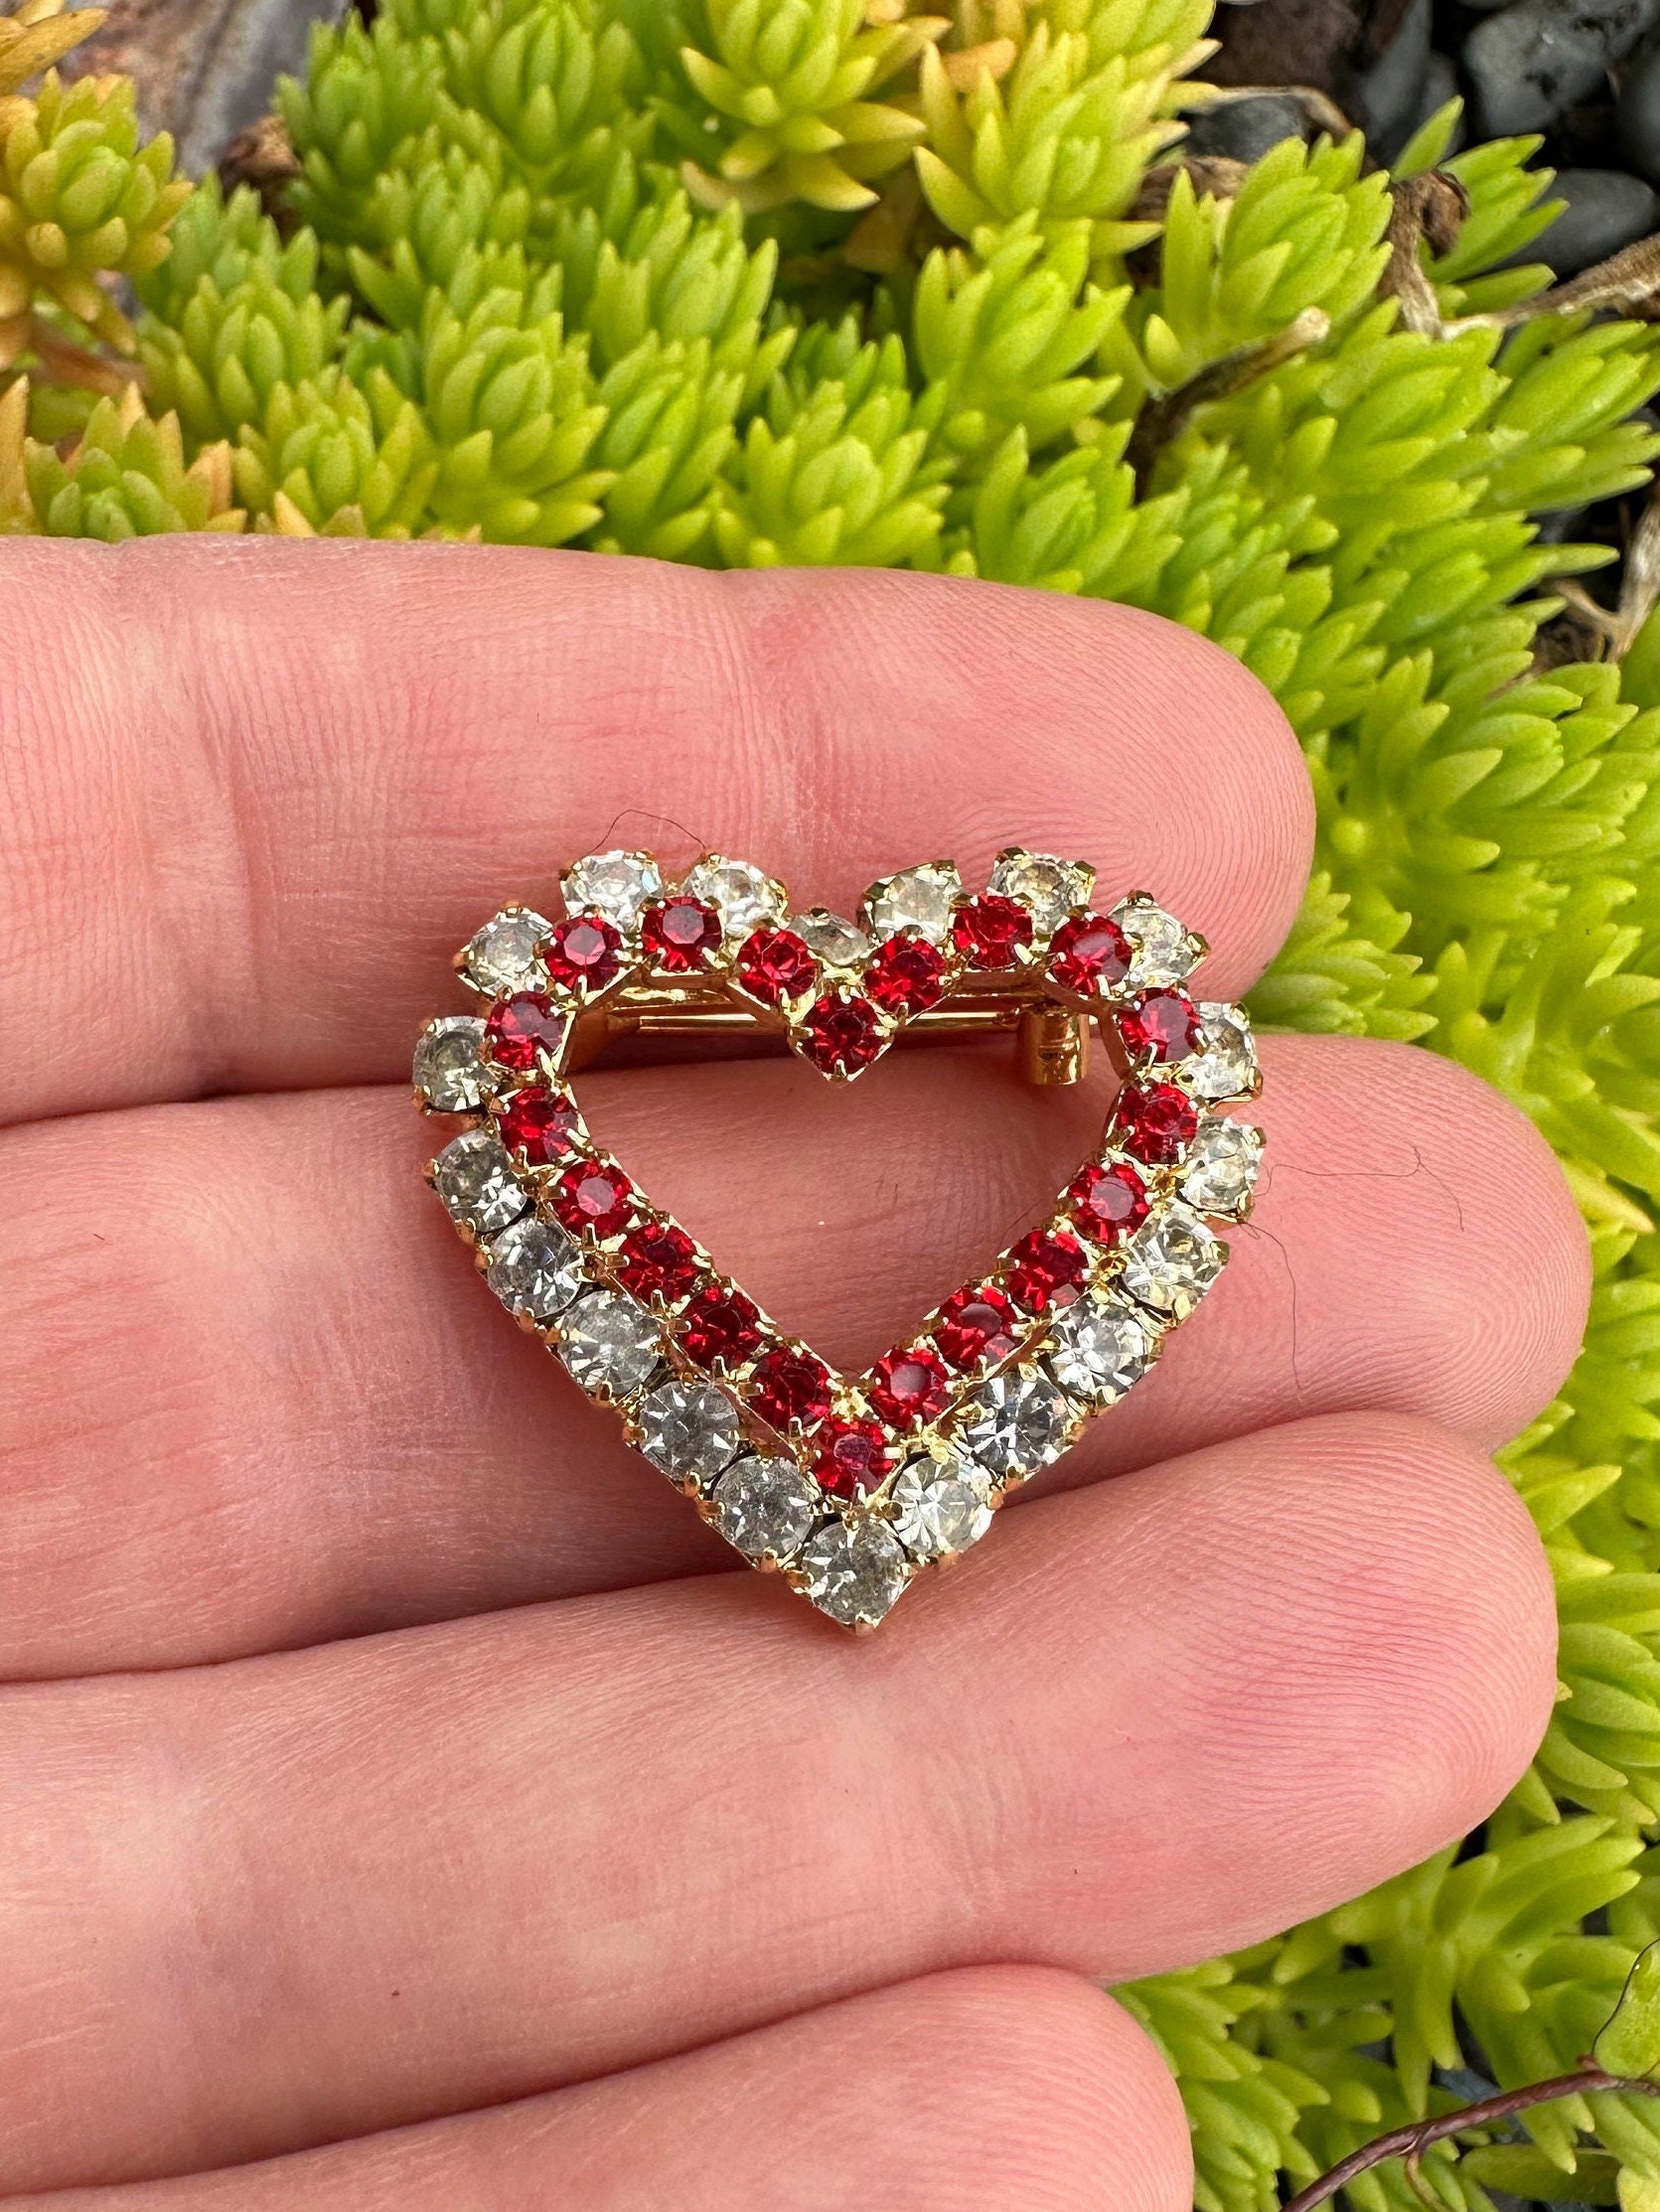 Rhinestone Heart Pin | Multi Color | Valentine's Day Pins by PinMart